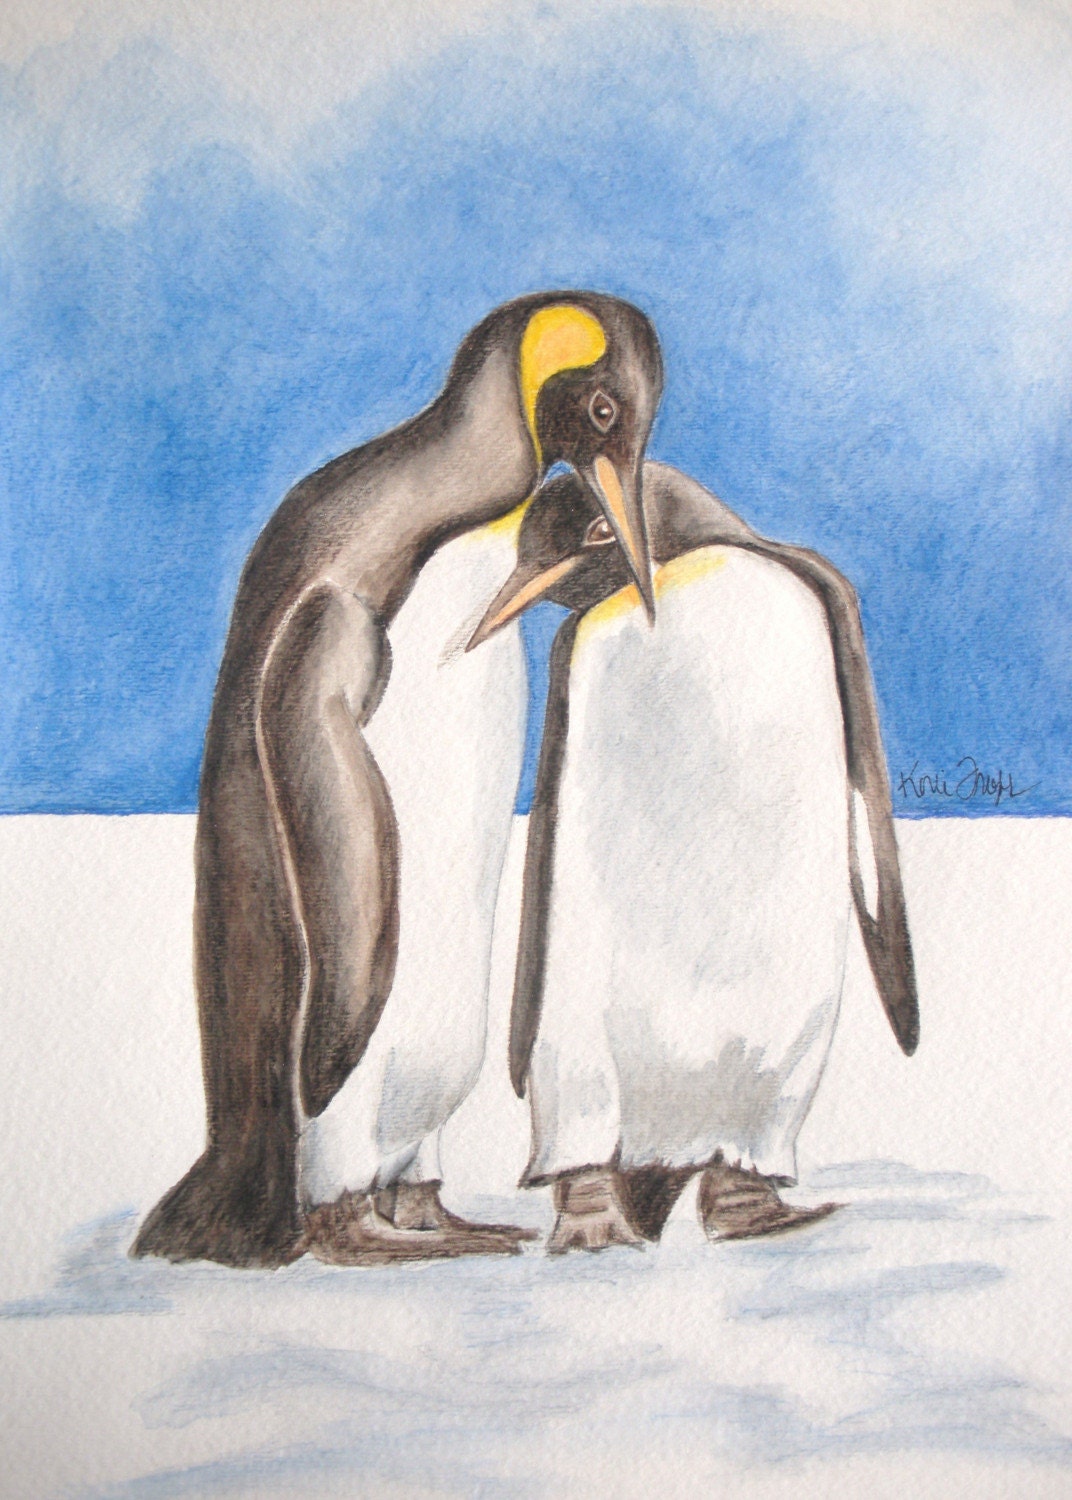 My Only Penguin ORIGINAL watercolor painting by konifrazer on etsy